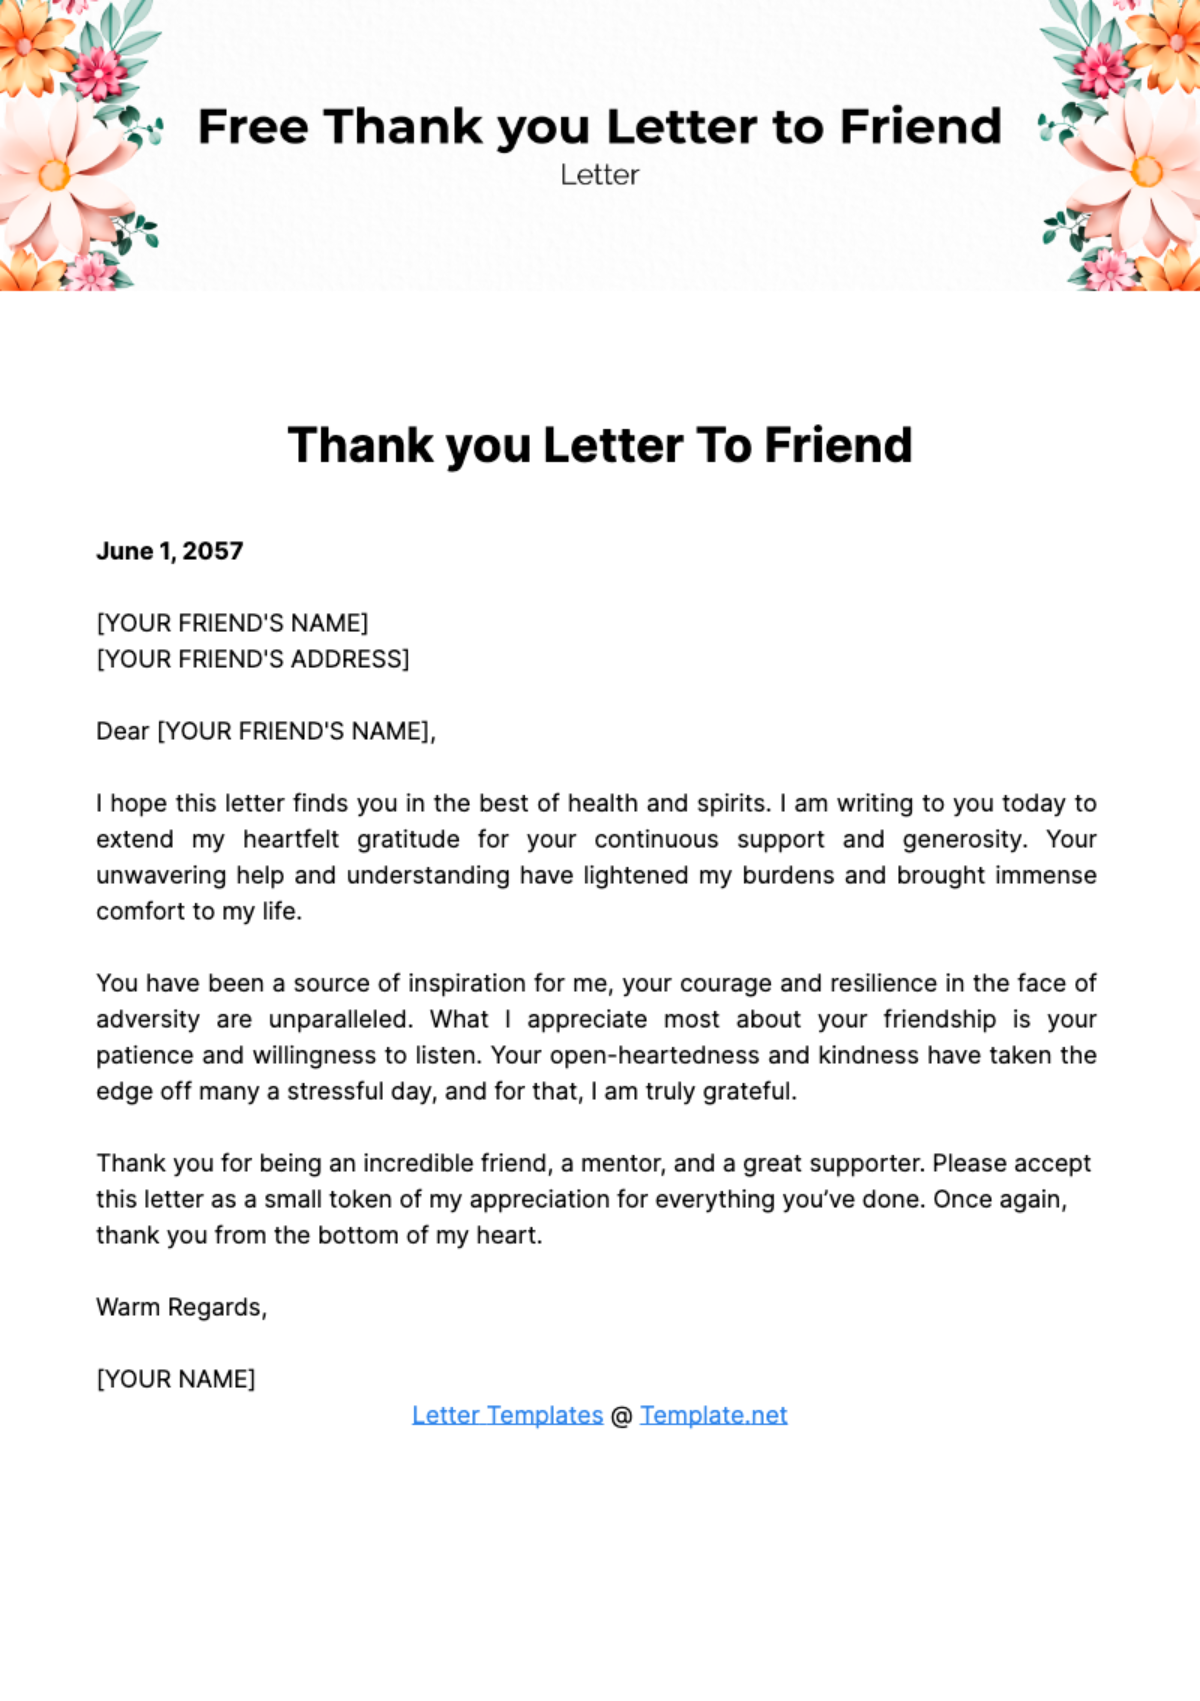 Thank you Letter to Friend Template